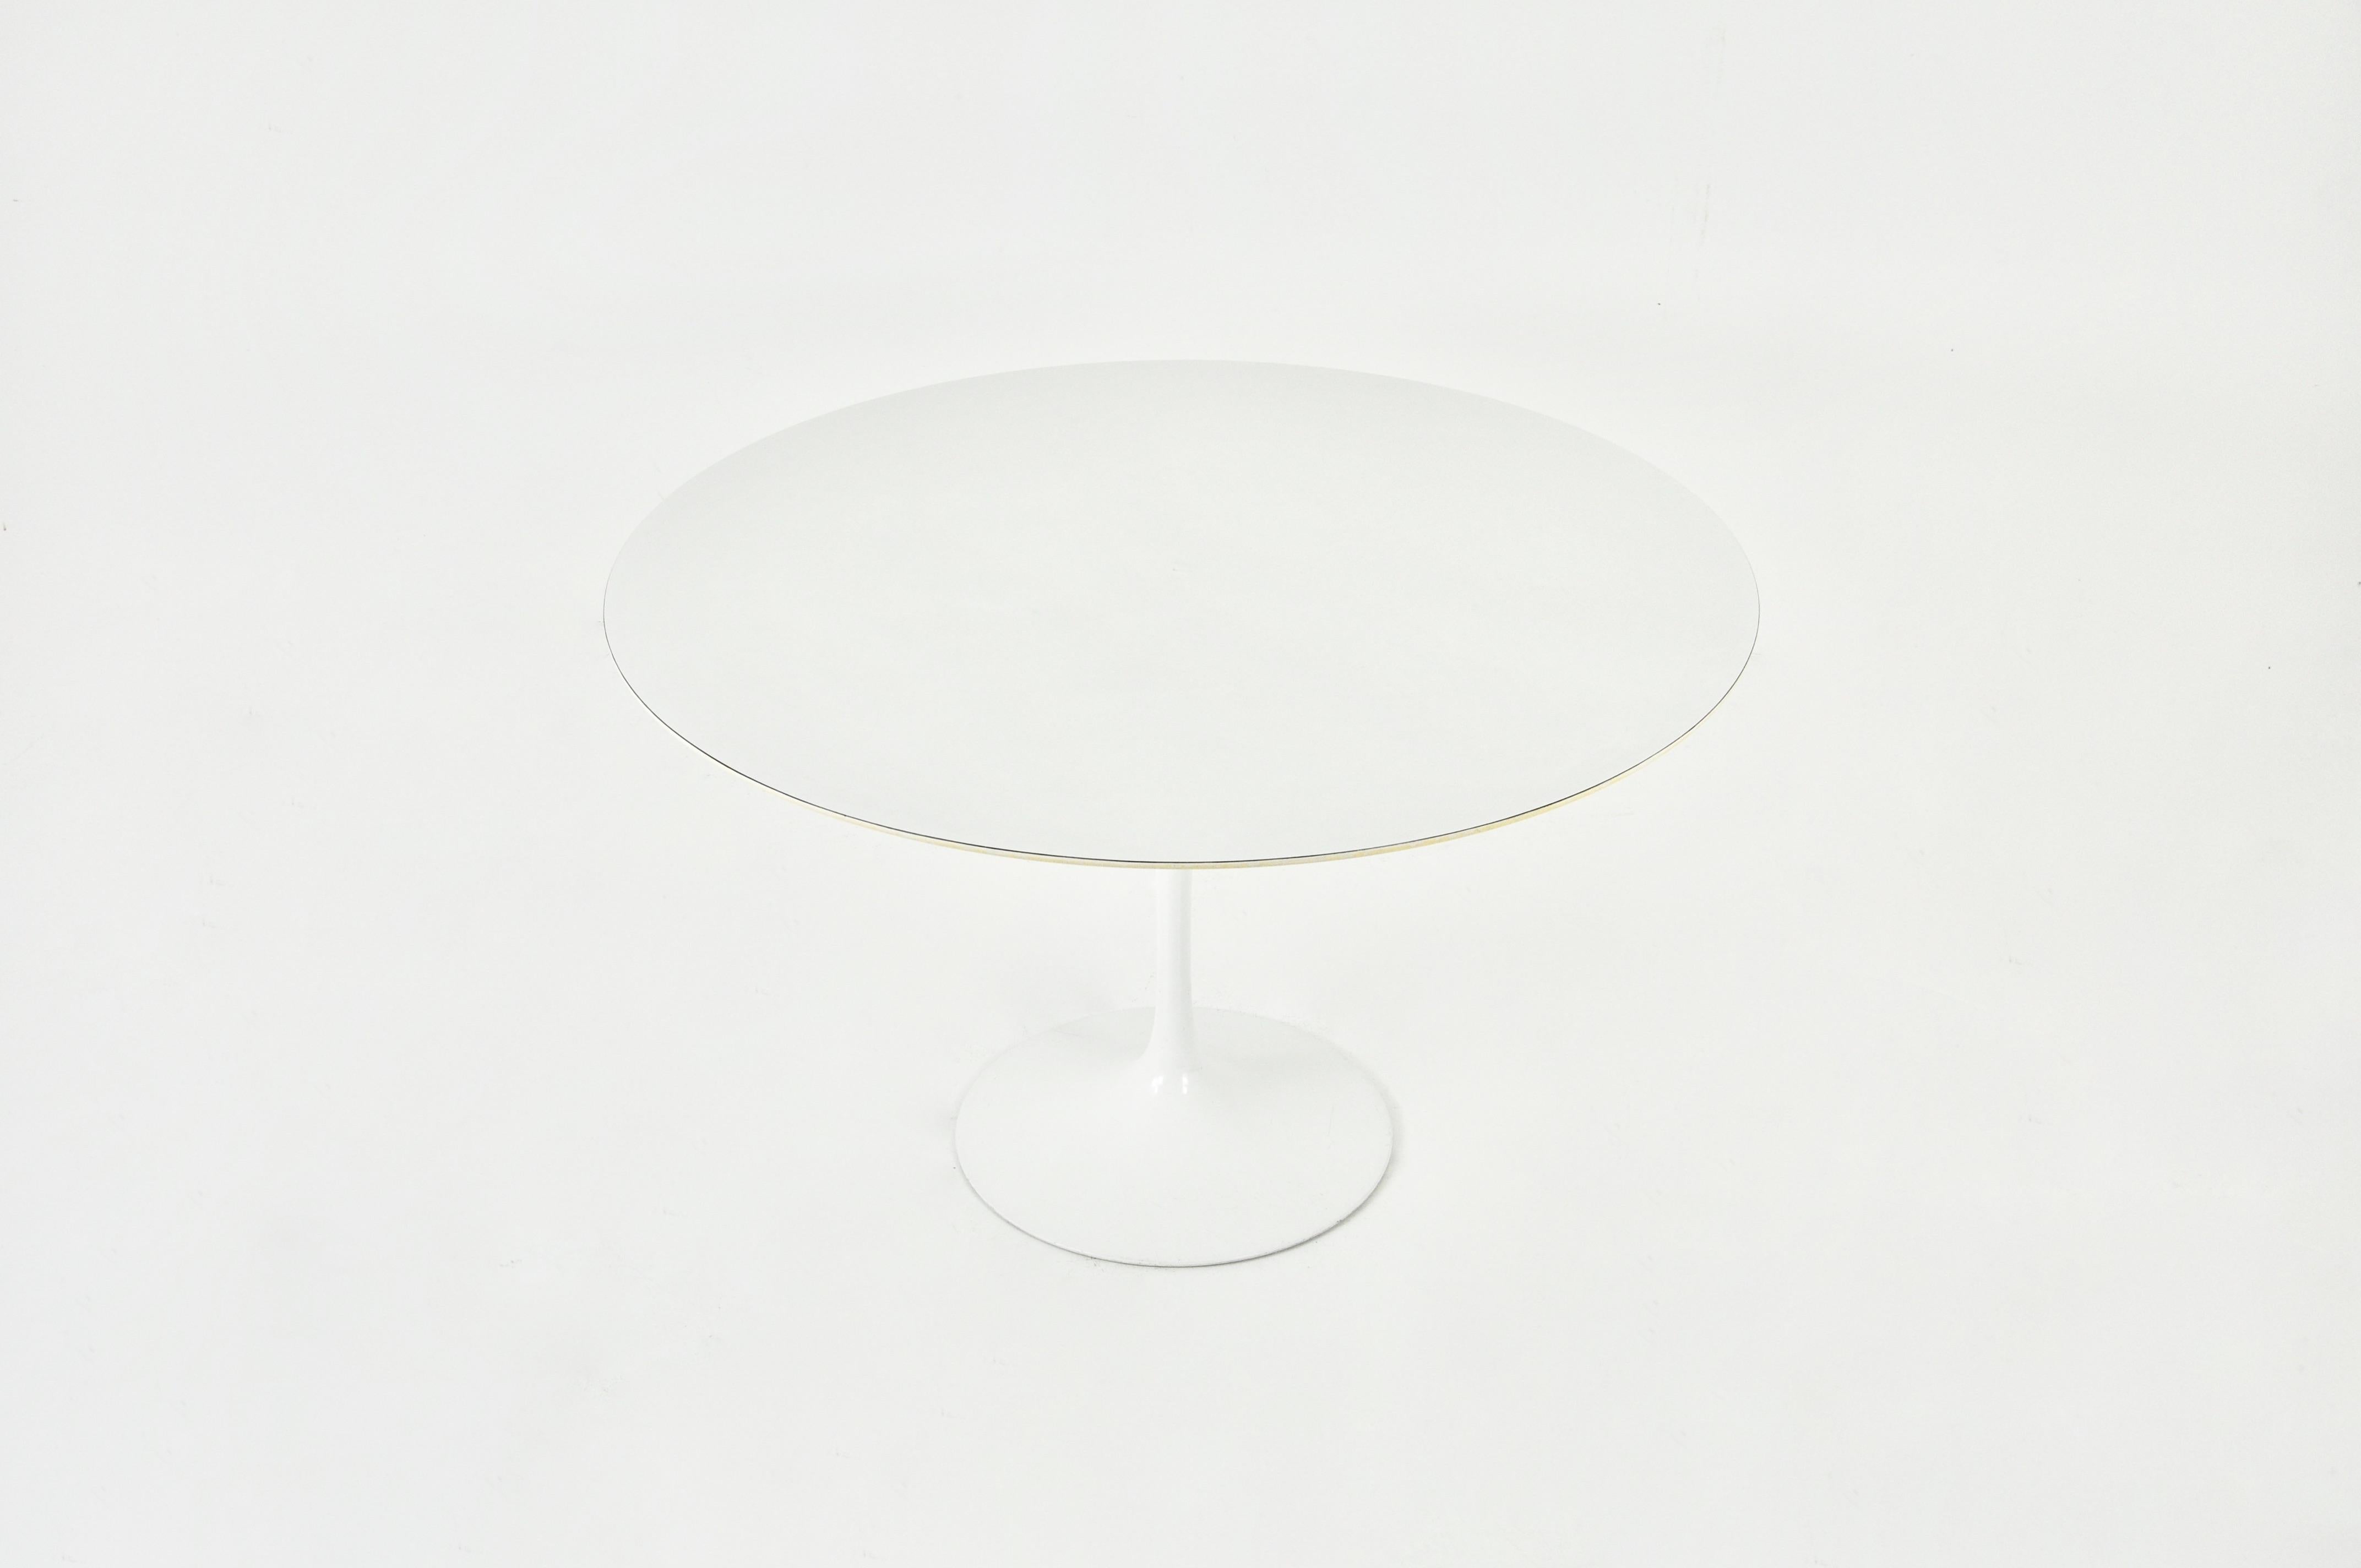 Round table in white laminate with aluminium base designed by Eero Saarinen and produced by Knoll International. Numbered under the leg. Wear due to time and age of the table.